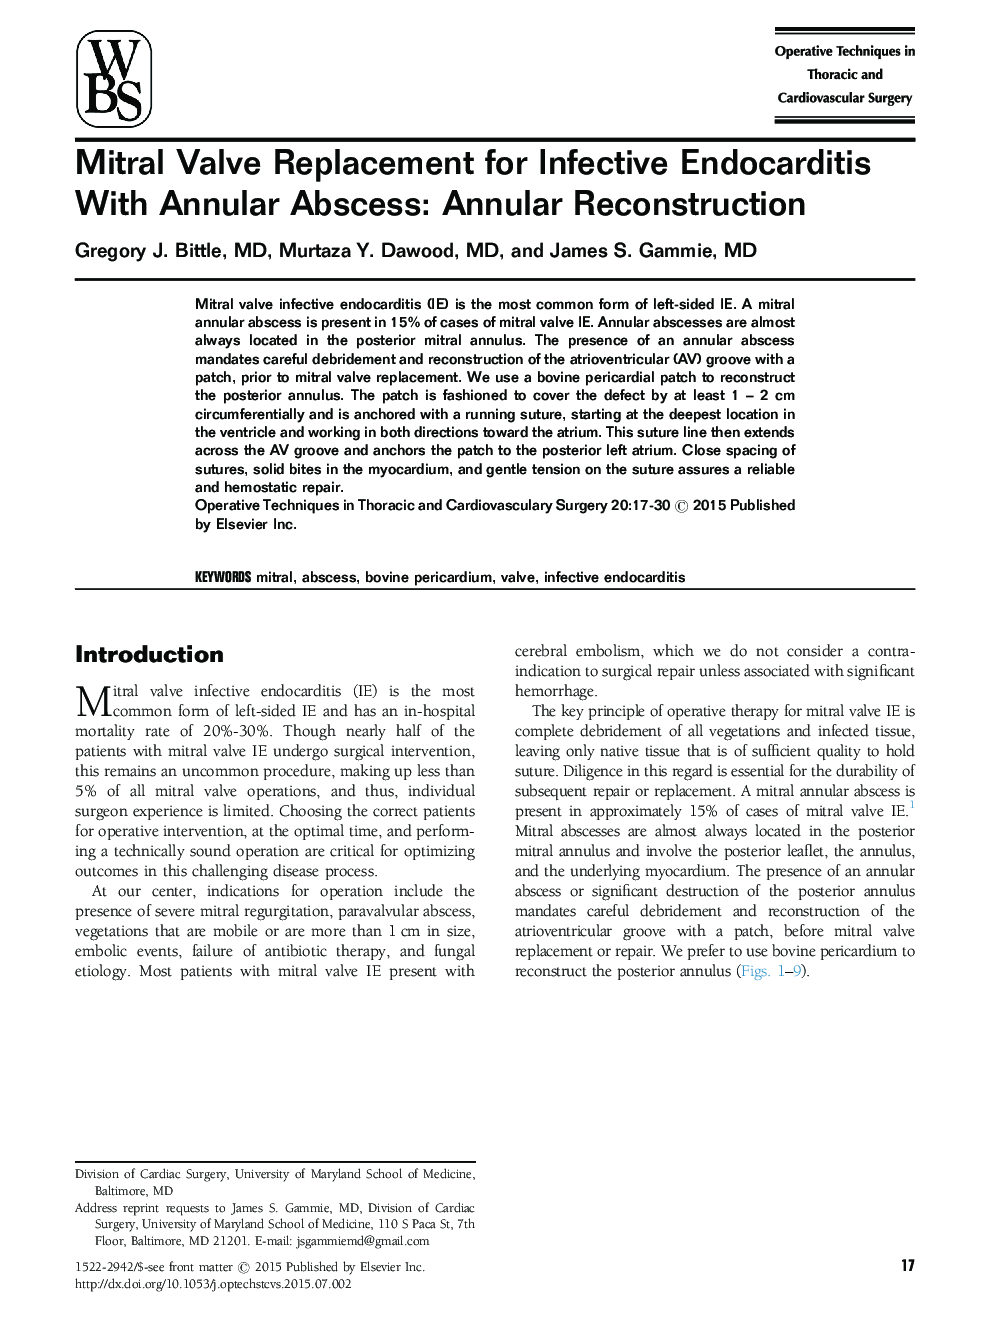 Mitral Valve Replacement for Infective Endocarditis With Annular Abscess: Annular Reconstruction